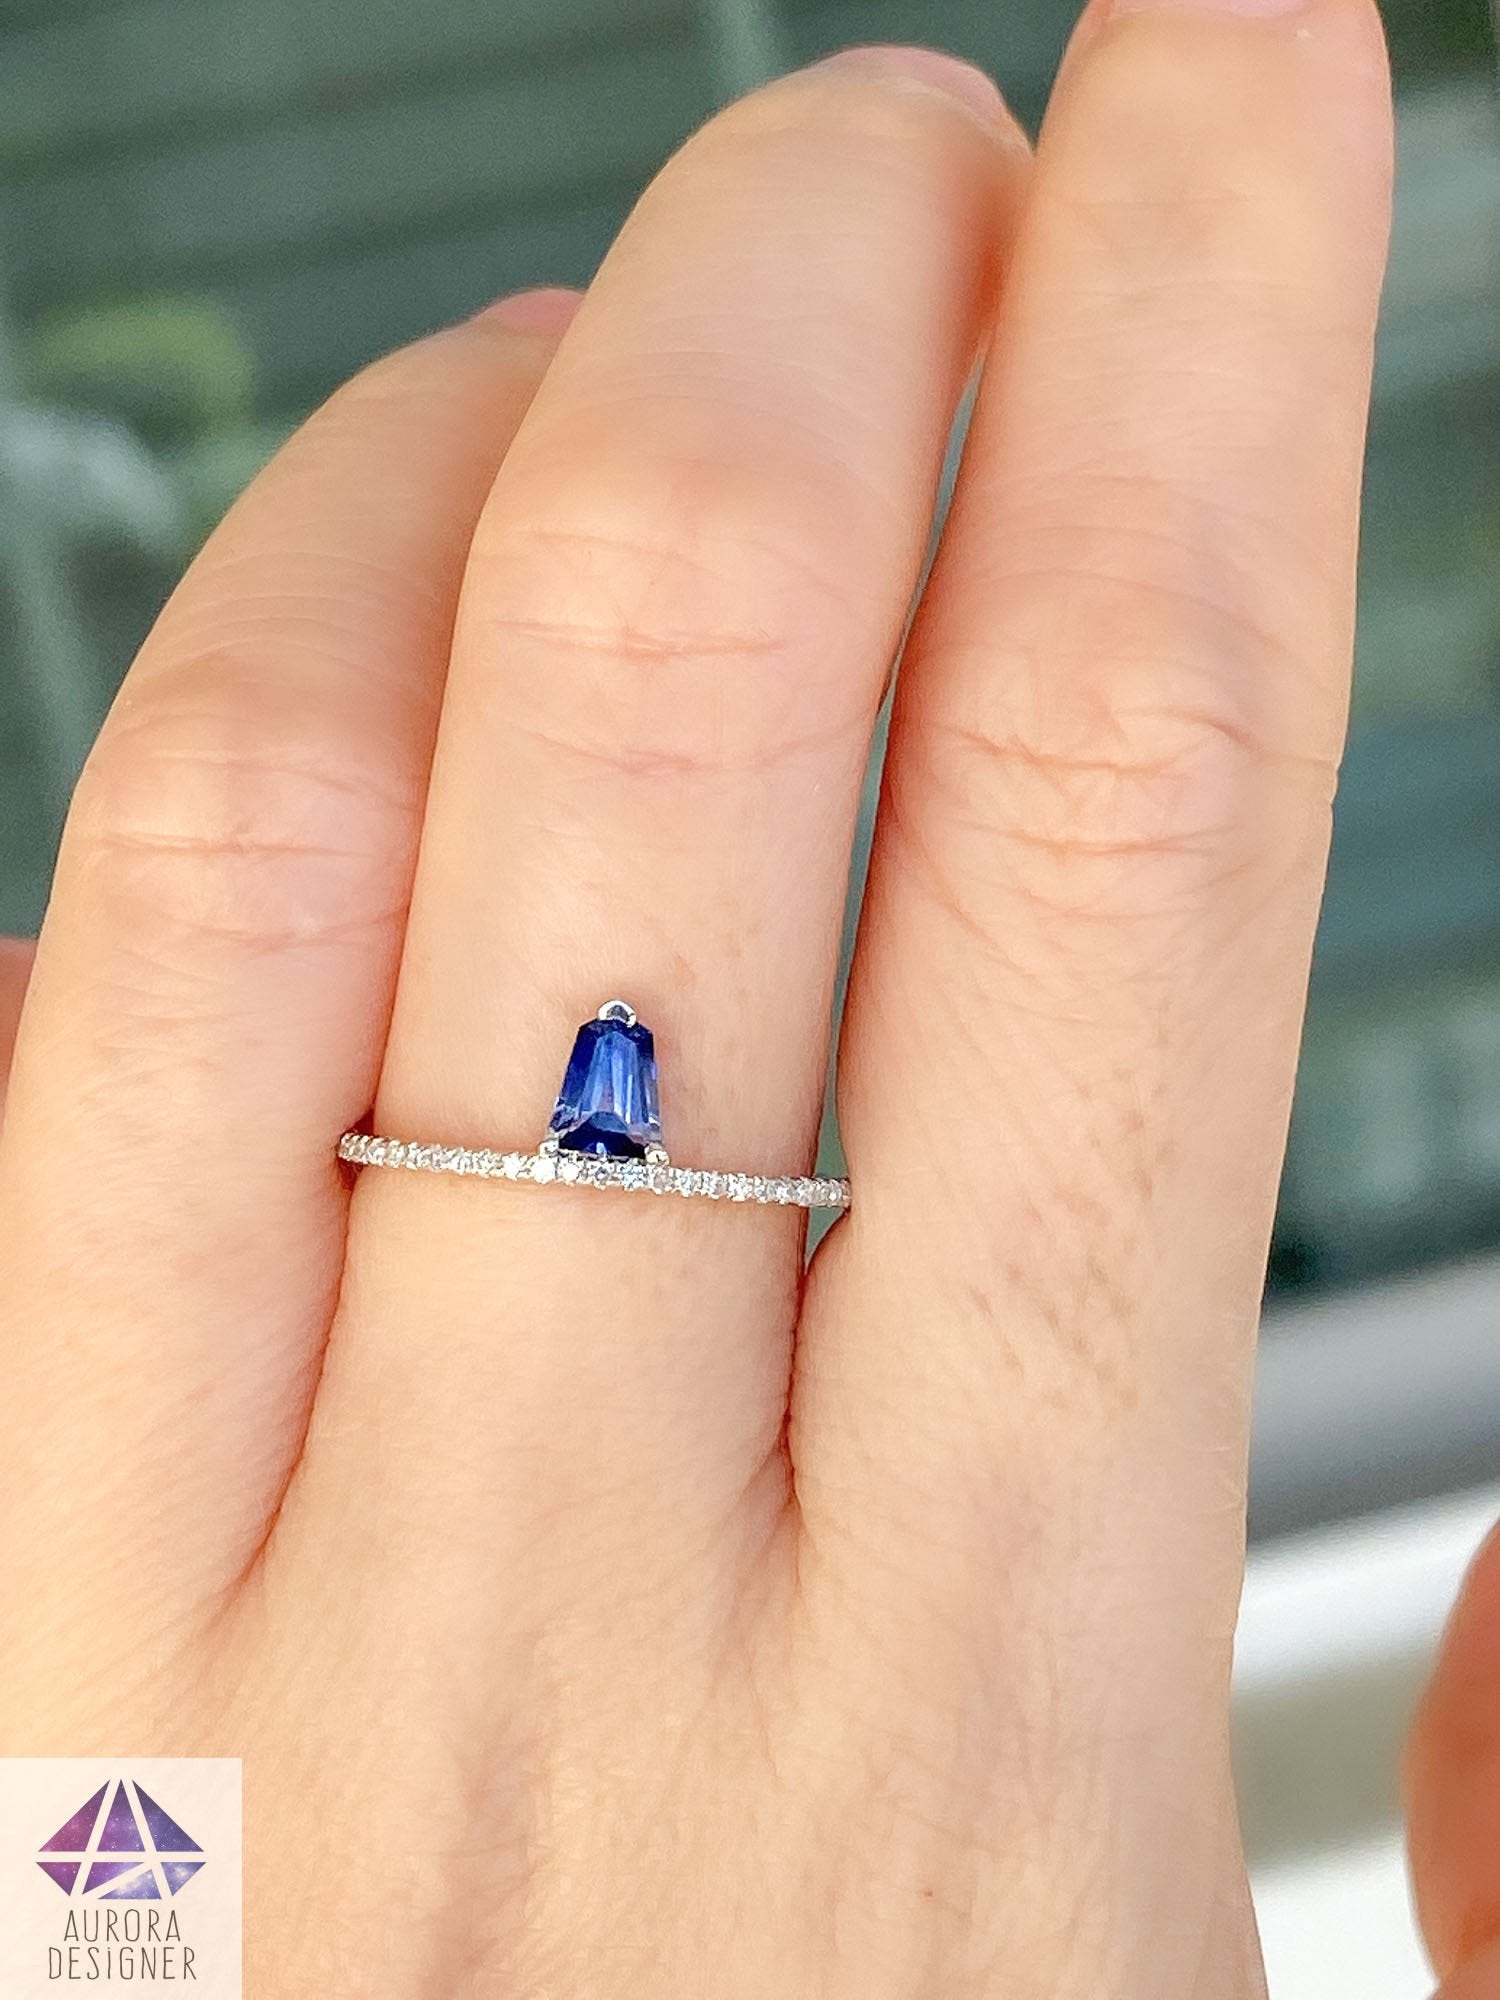 Odyssey Chevron Band Ring with Enamel and Blue Sapphire